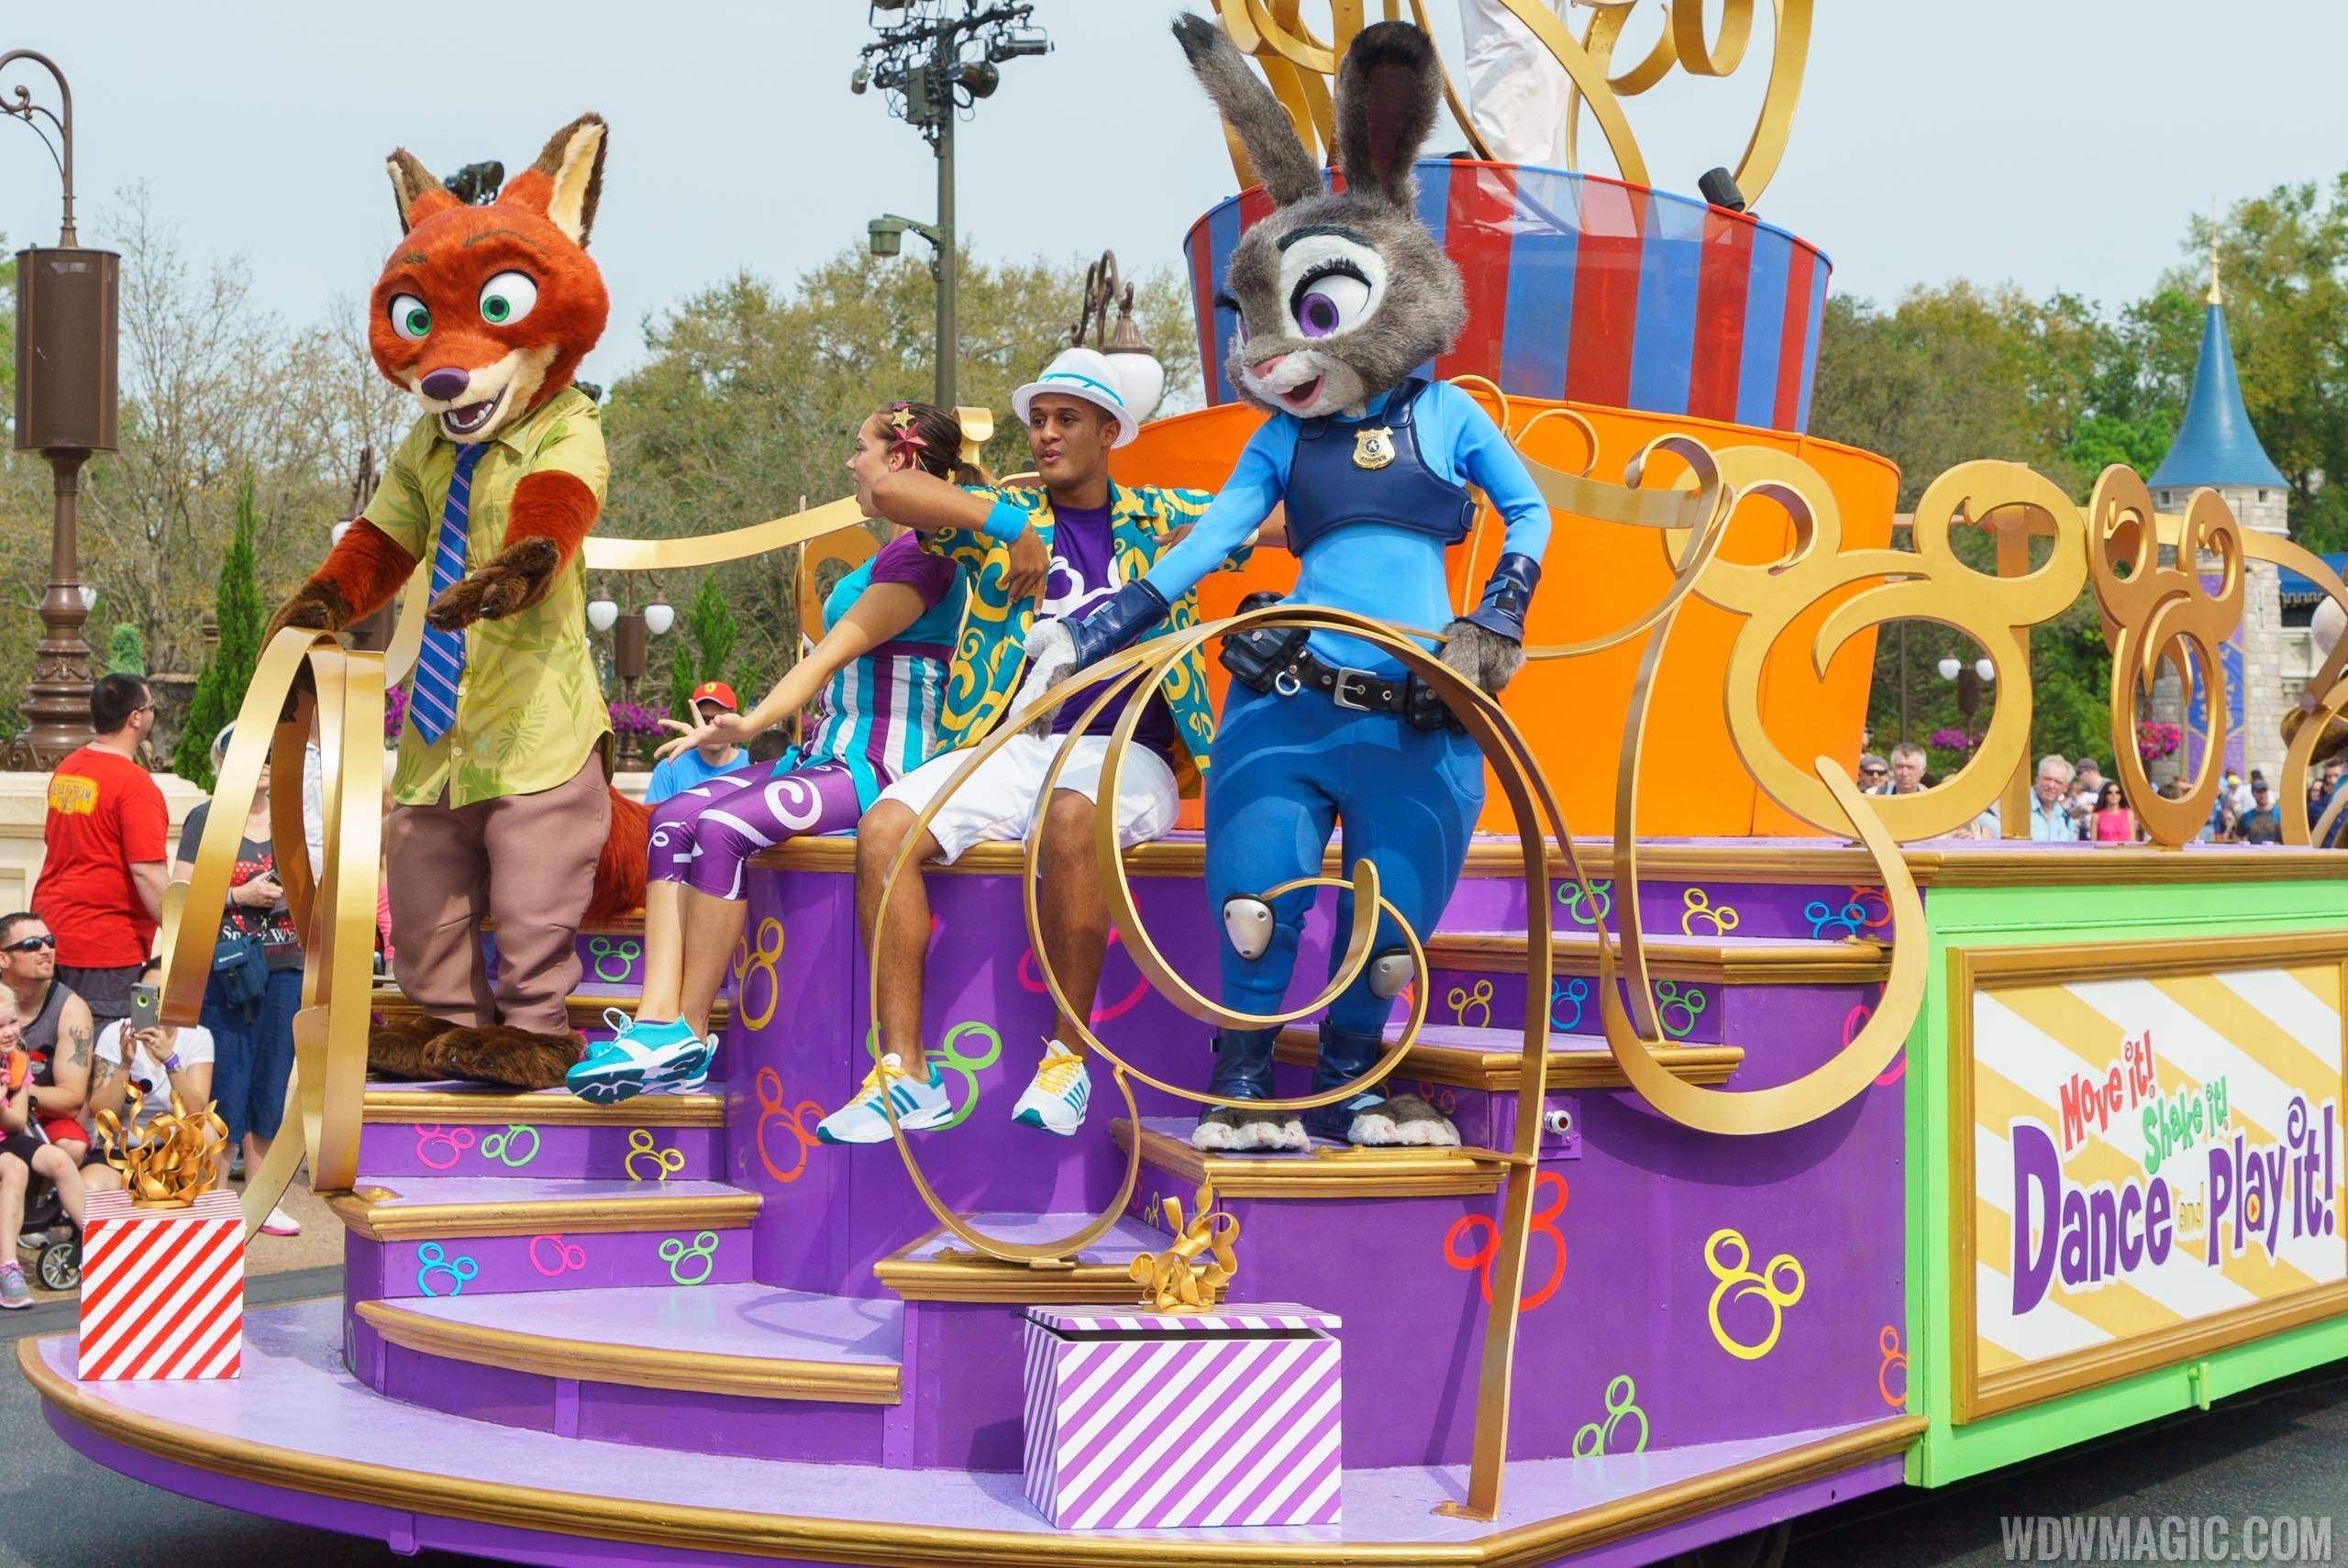 PHOTOS - Nick Wilde and Judy Hopps from Zootopia now appearing at the Magic Kingdom